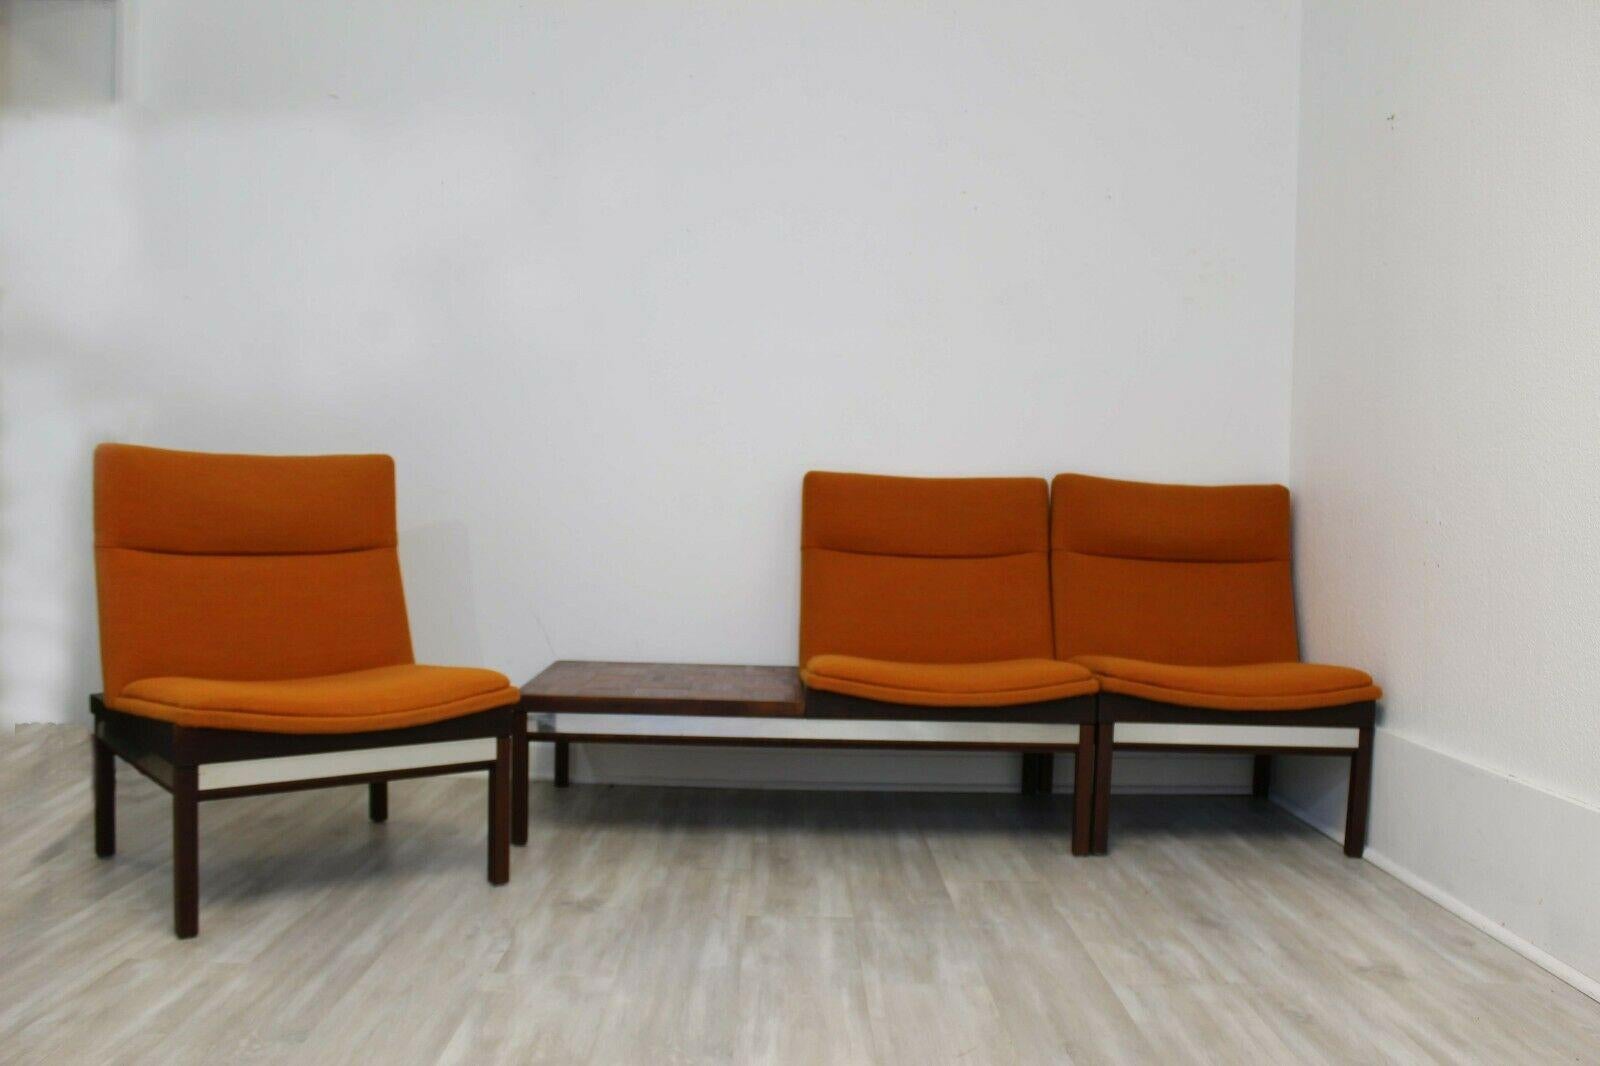 This bench seating is a fantastic example of Arthur Umanoff iconic design and includes a walnut, parquet side table attached to an upholstered orange seat. The set also includes two, separate and matching orange upholstered chairs making this a